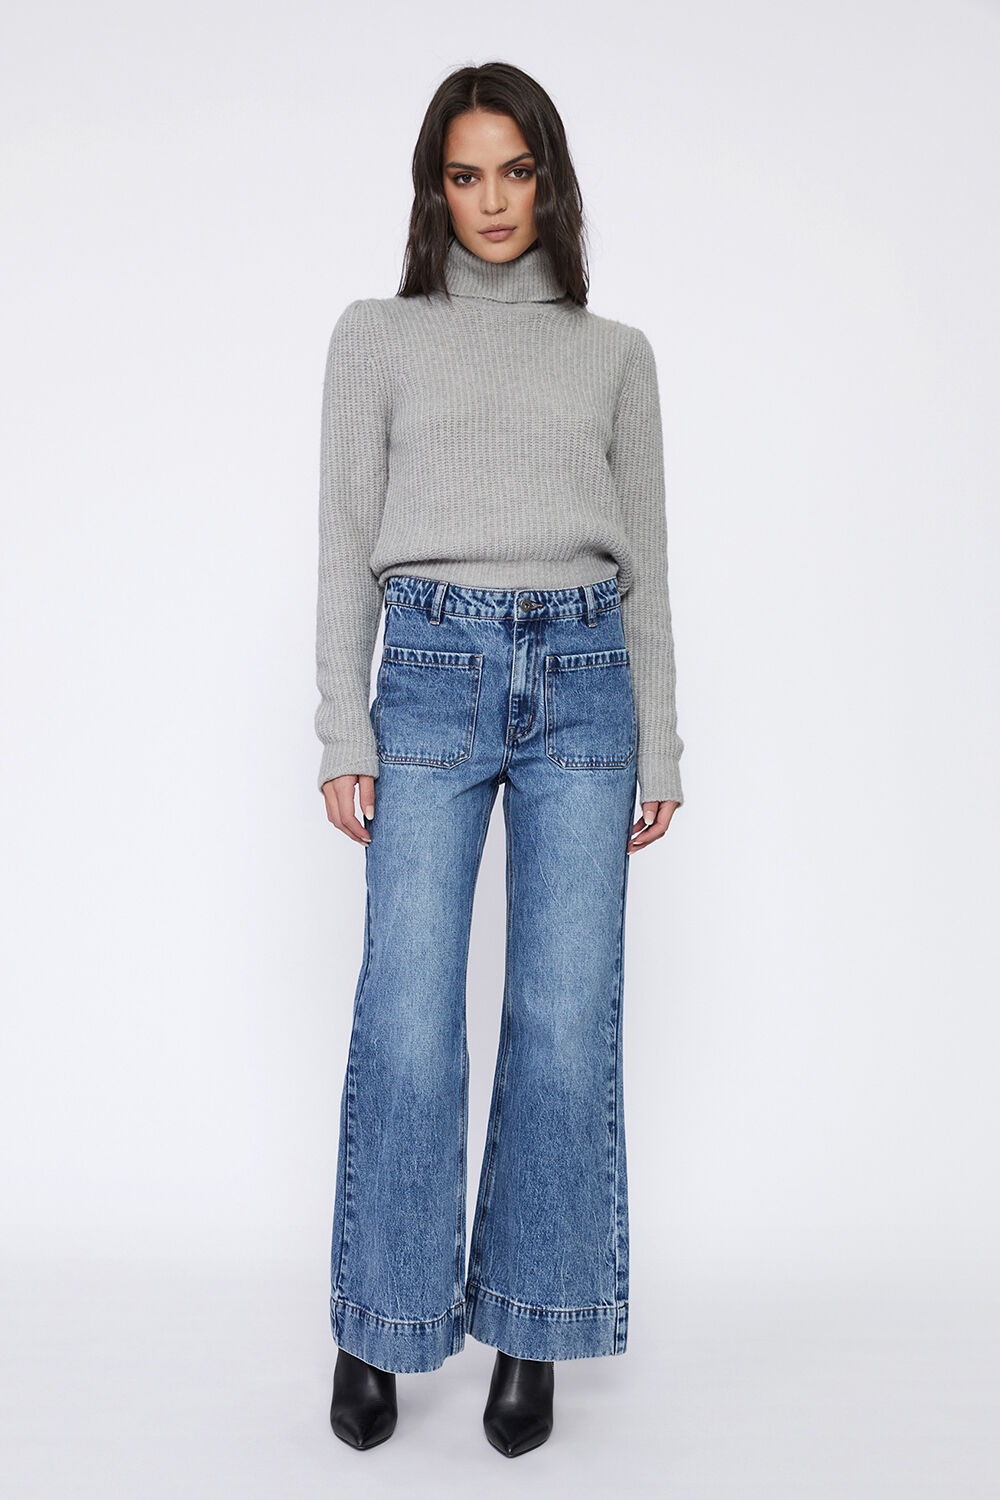 RORY CROP KNIT in colour SMOKED PEARL